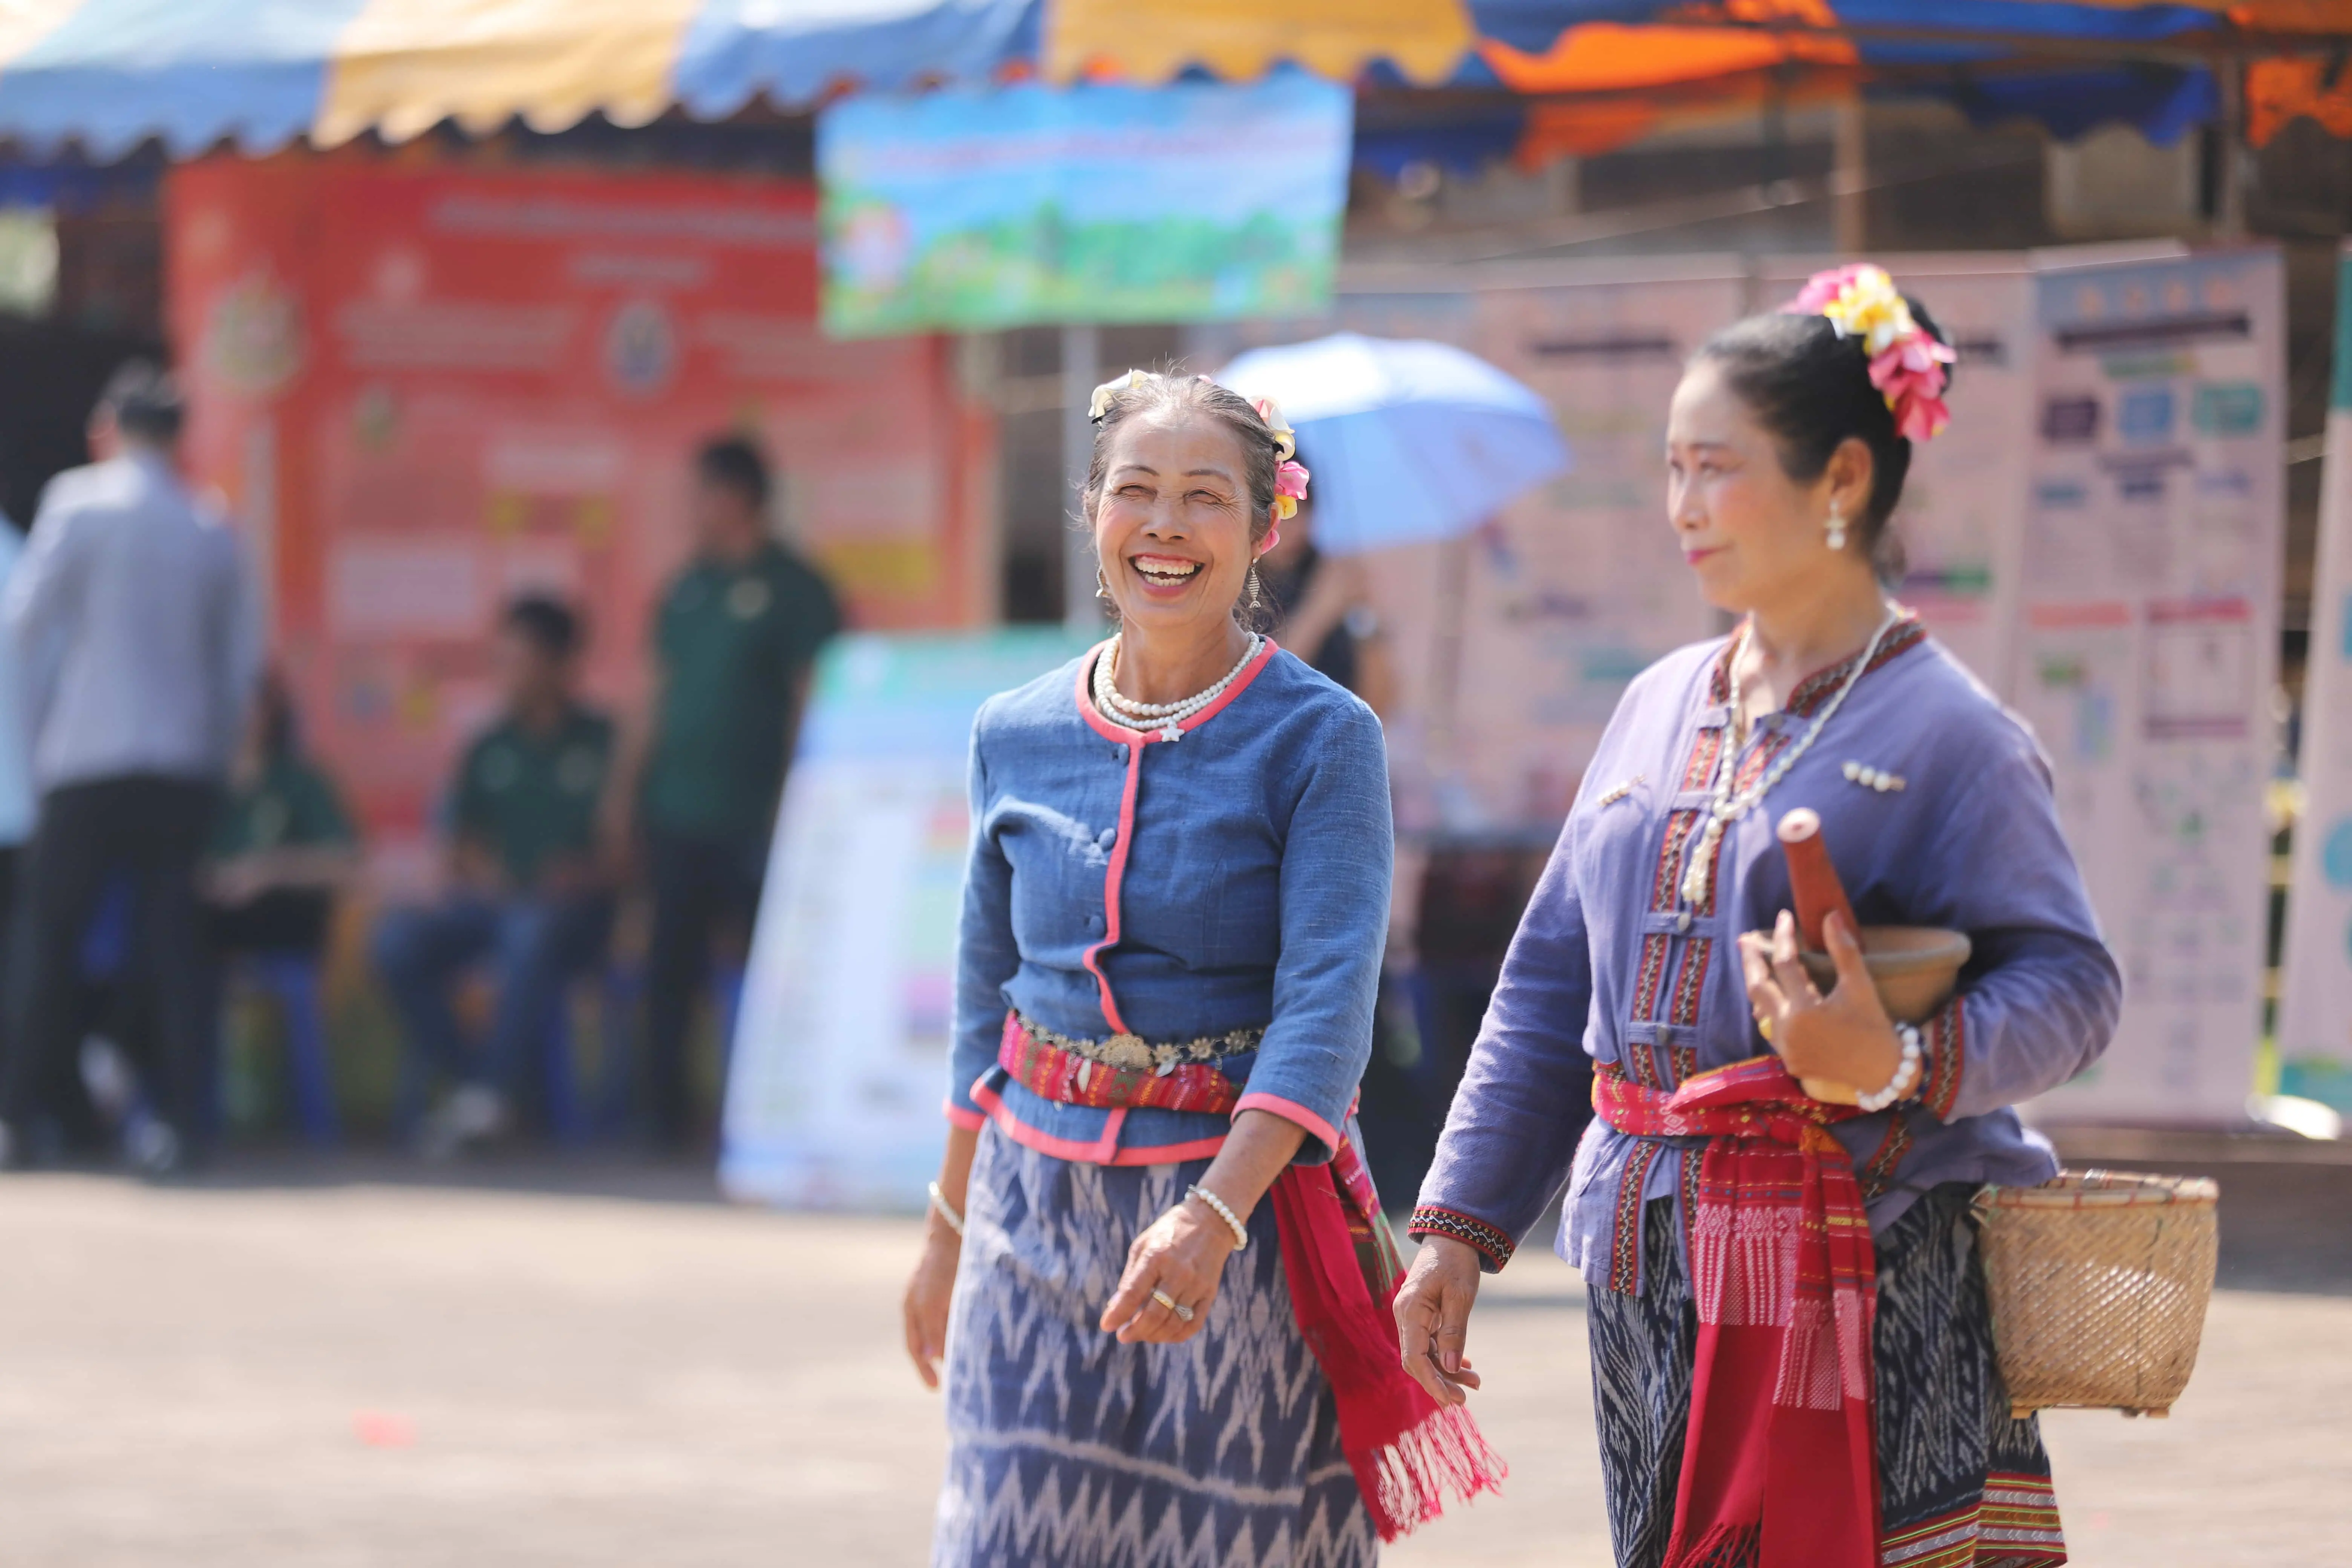 Two women walking and smiling